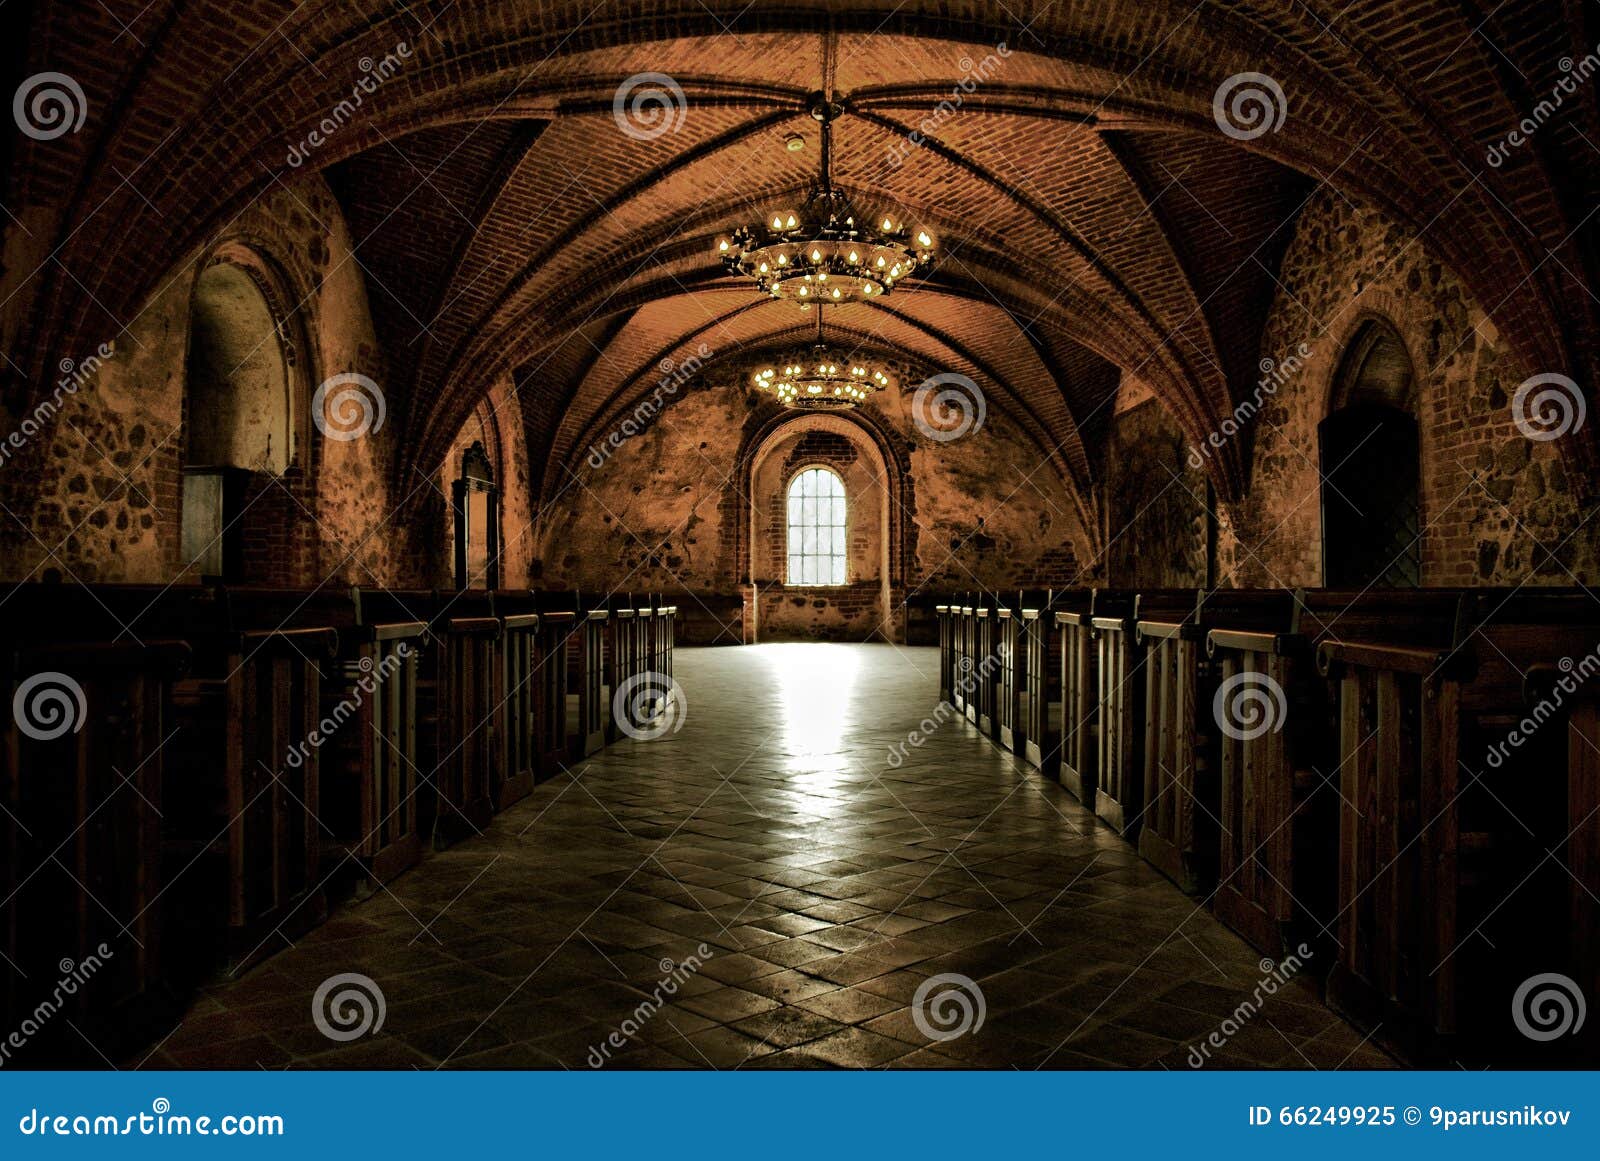 Castle Room ,medieval Interior, Gothic Hall Stock Image - Image of